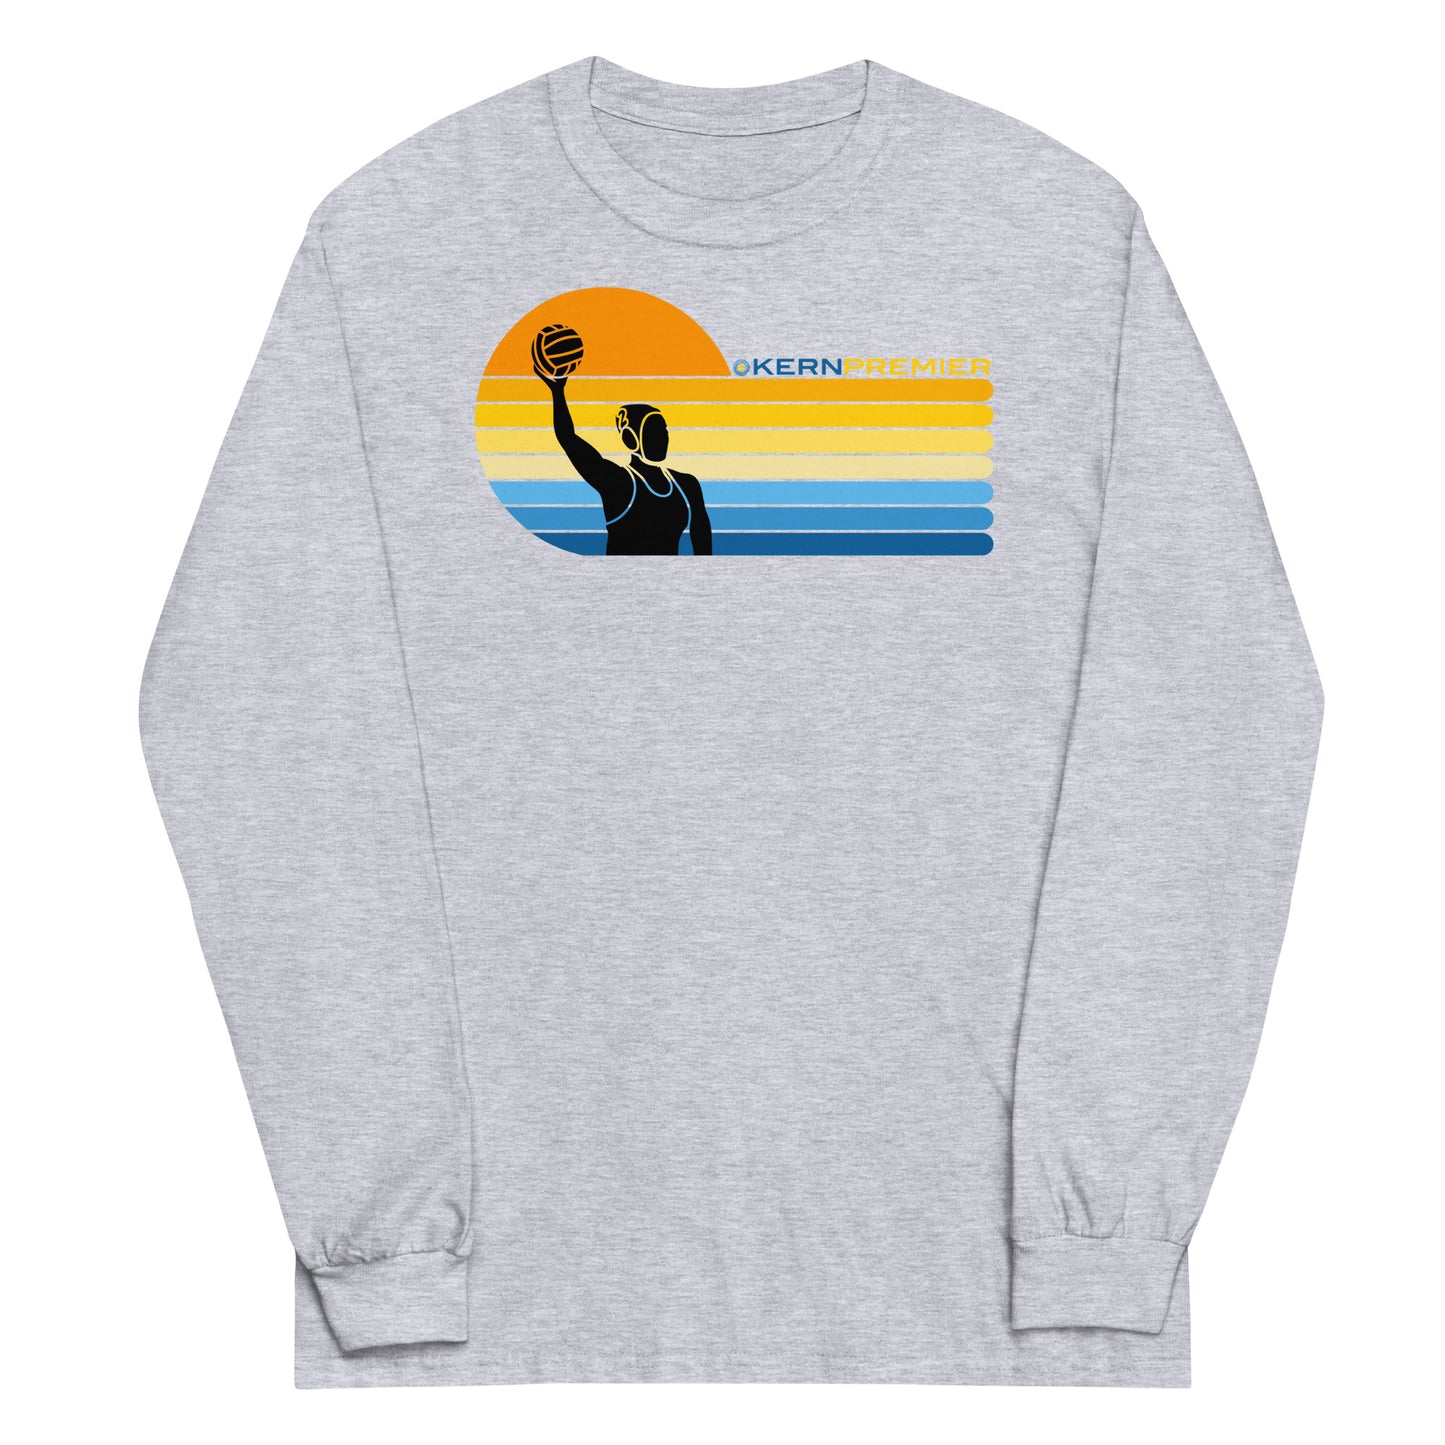 Kern Premier - 7 Color Left sided Sunset with Female Silhouette with Logo on Top - Long Sleeve Shirt - Gildan 2400